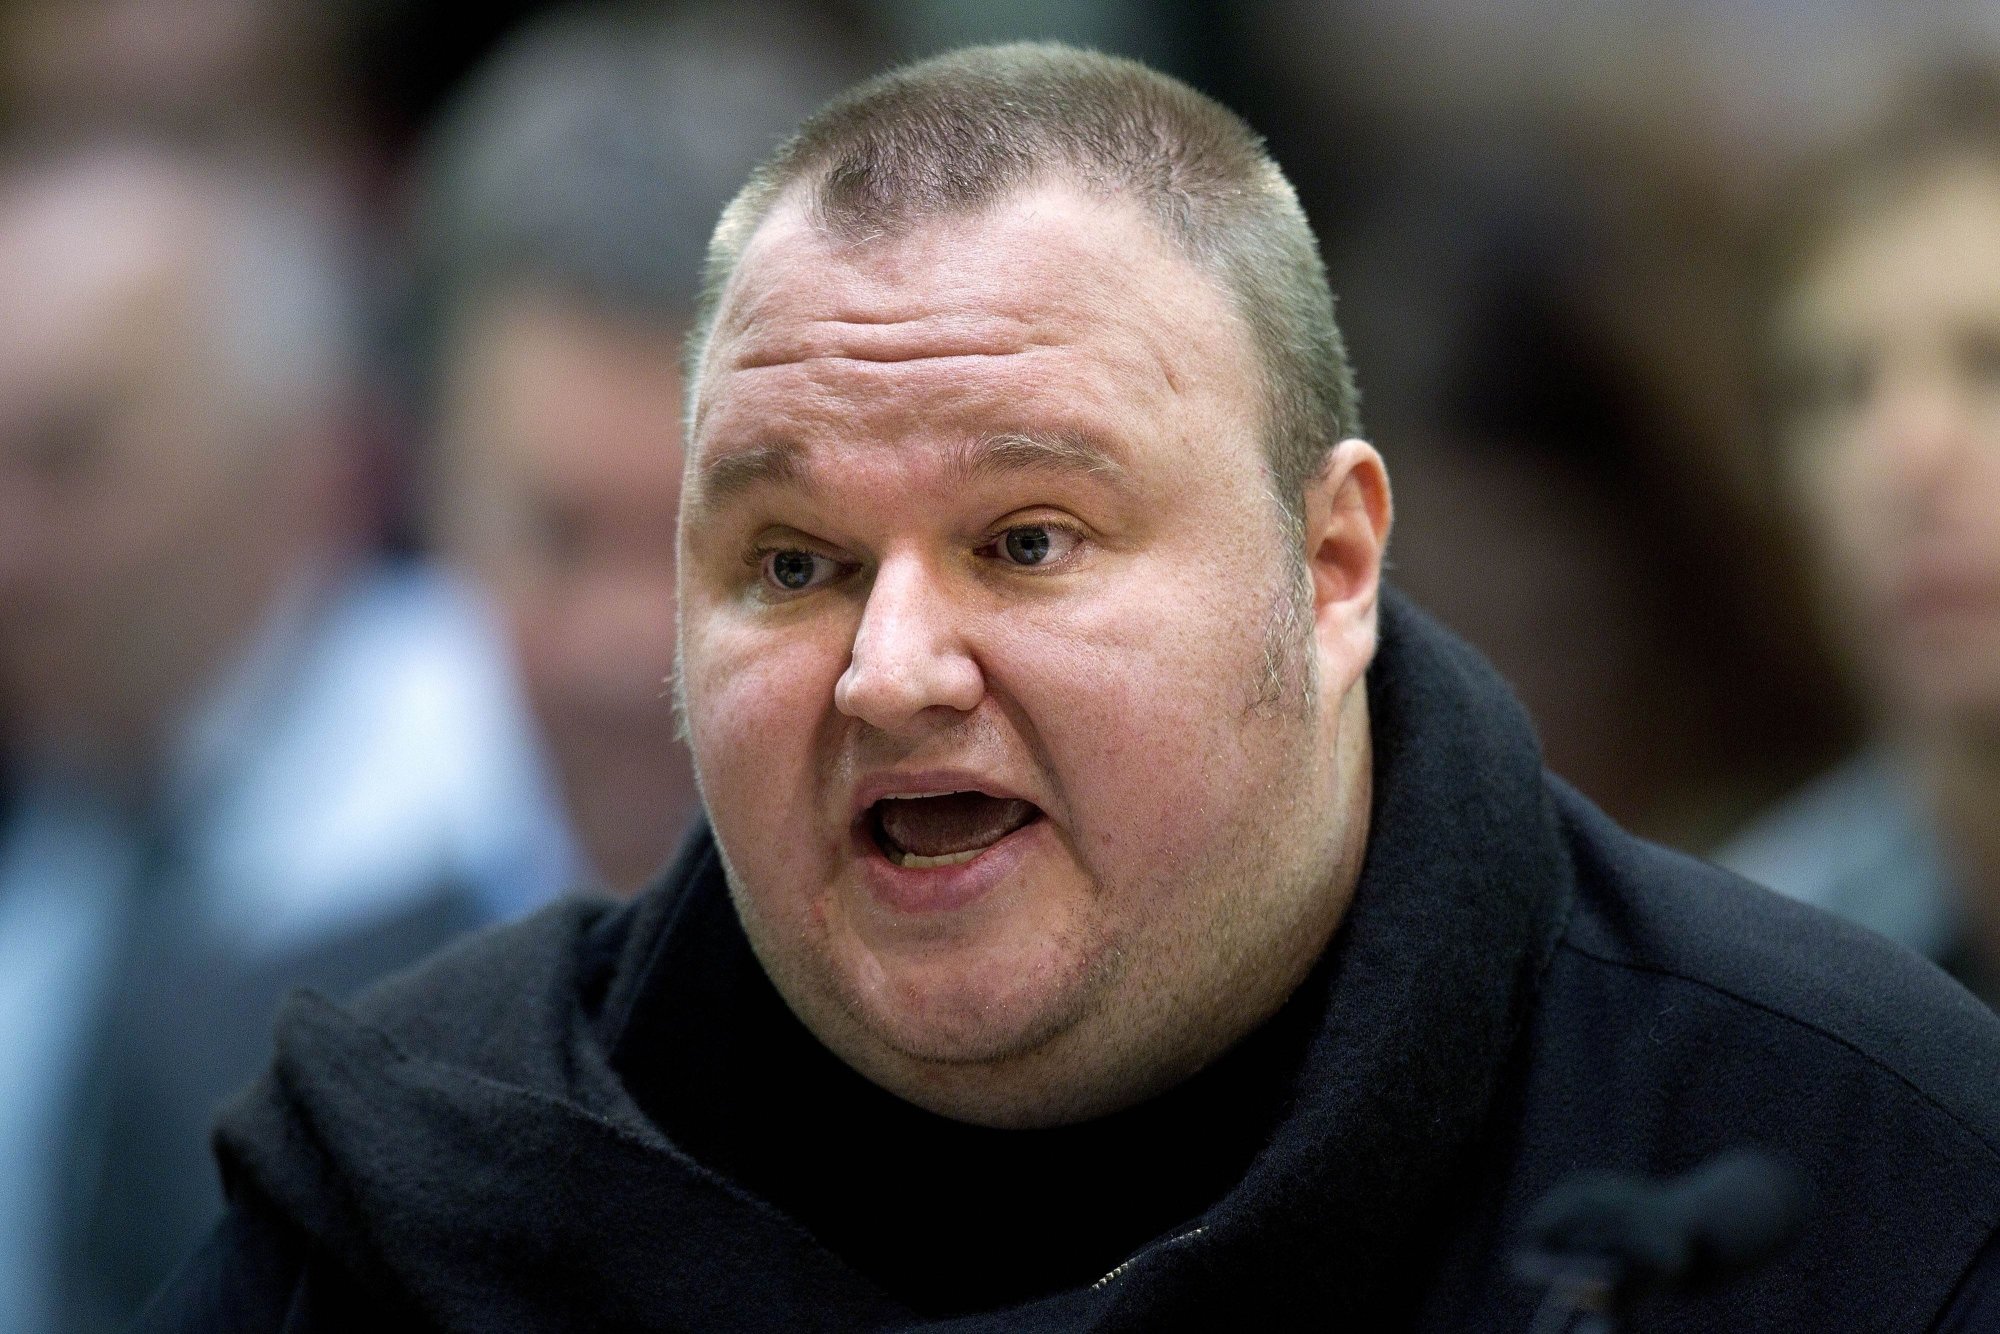 Megaupload founder Kim Dotcom says he will fund NZ's next America's Cup challenge. Photo: AP